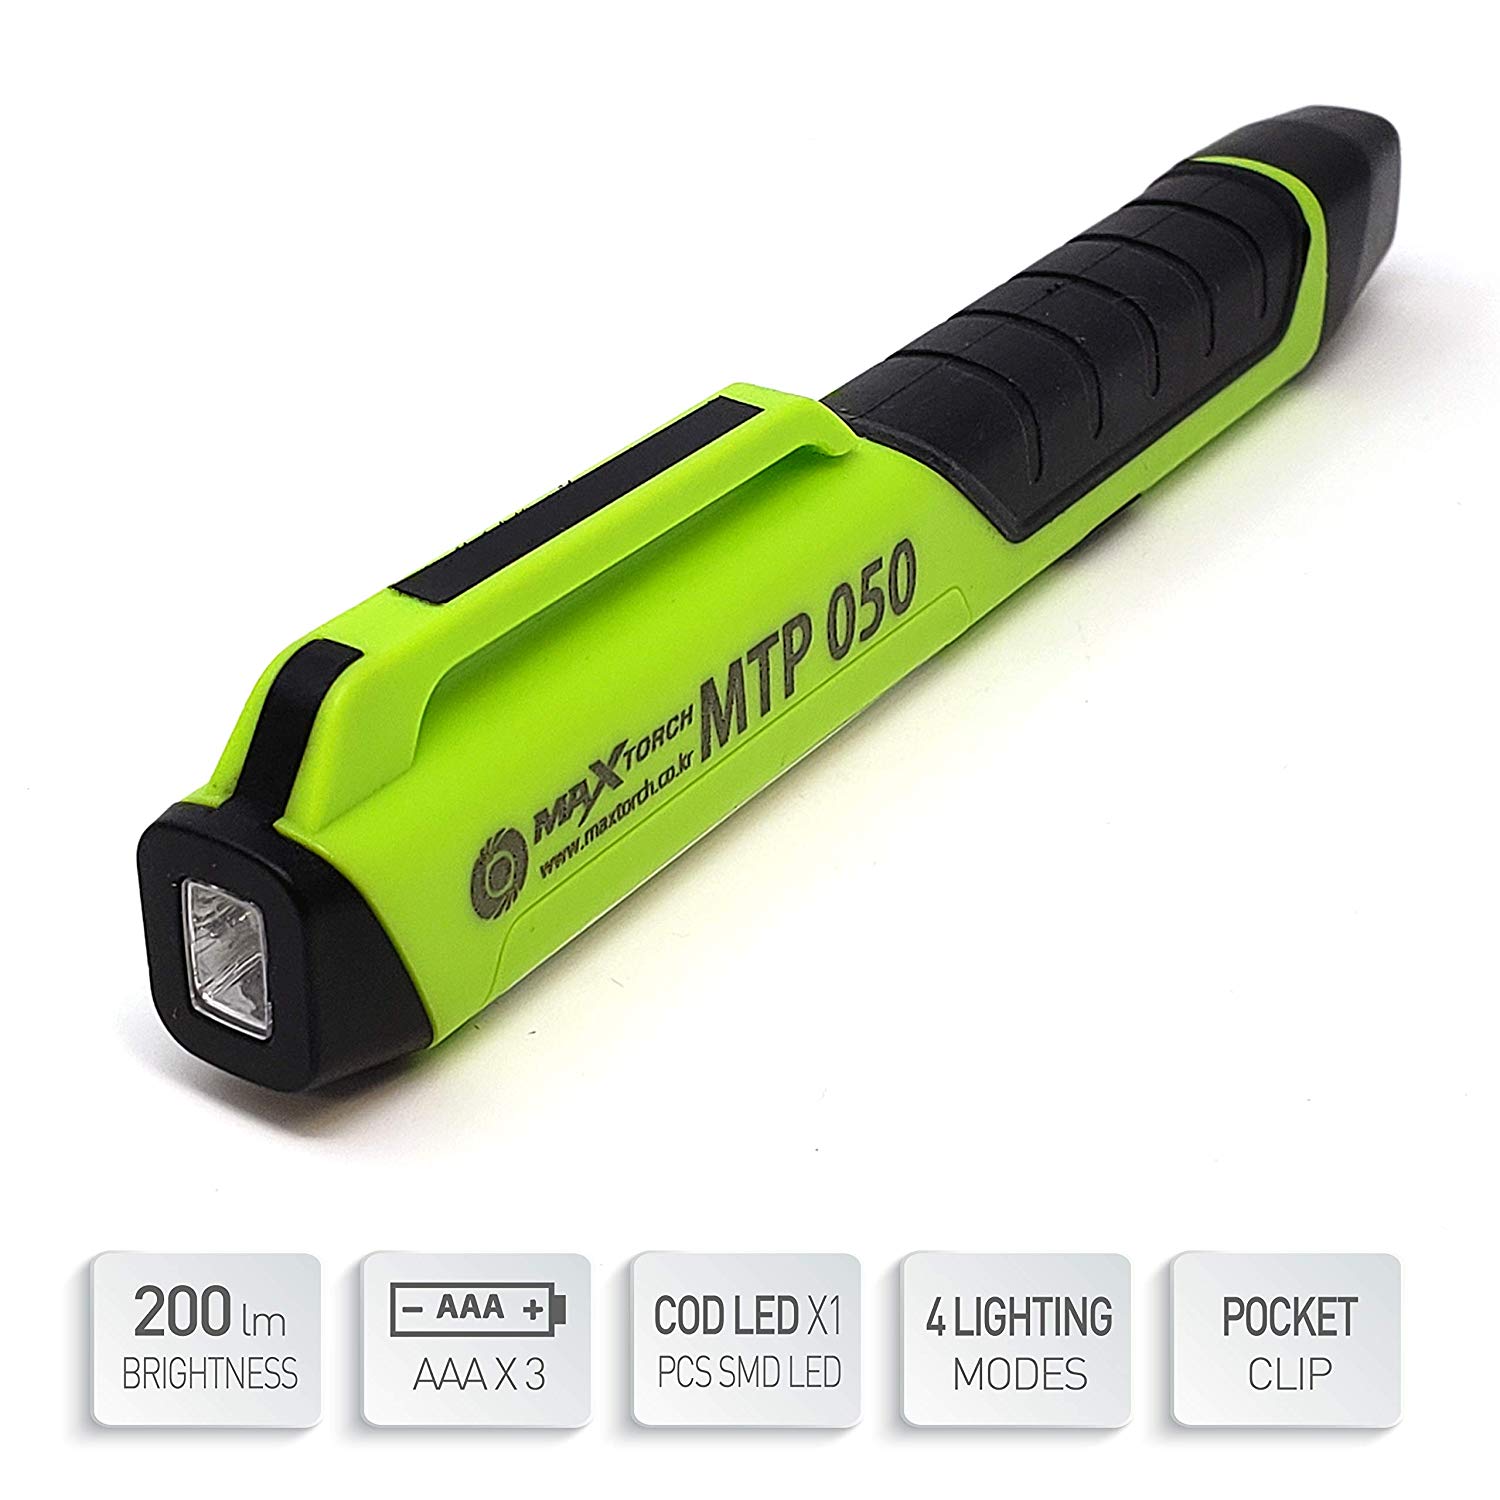 JBM CO. LTD Reinvents Tactical Lighting with the Release of Its Pocket Clip Multifunctional LED Flashlight